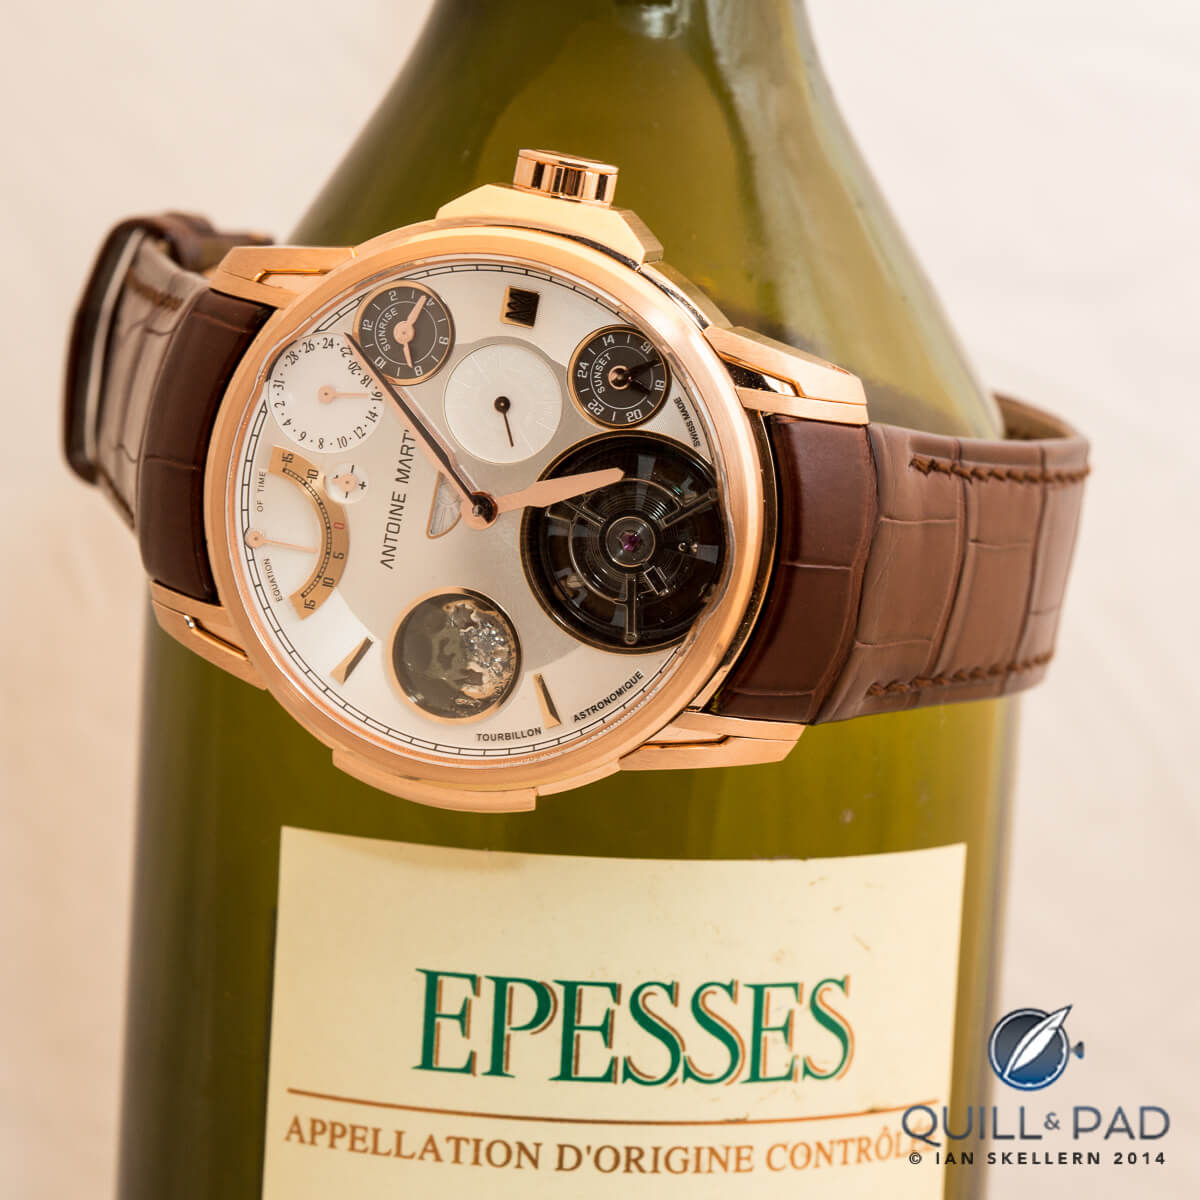 Antoine Martin Tourbillon Perpetual Calendar and a bottle of white wine from the Epesses region of Switzerland (near Lausanne)